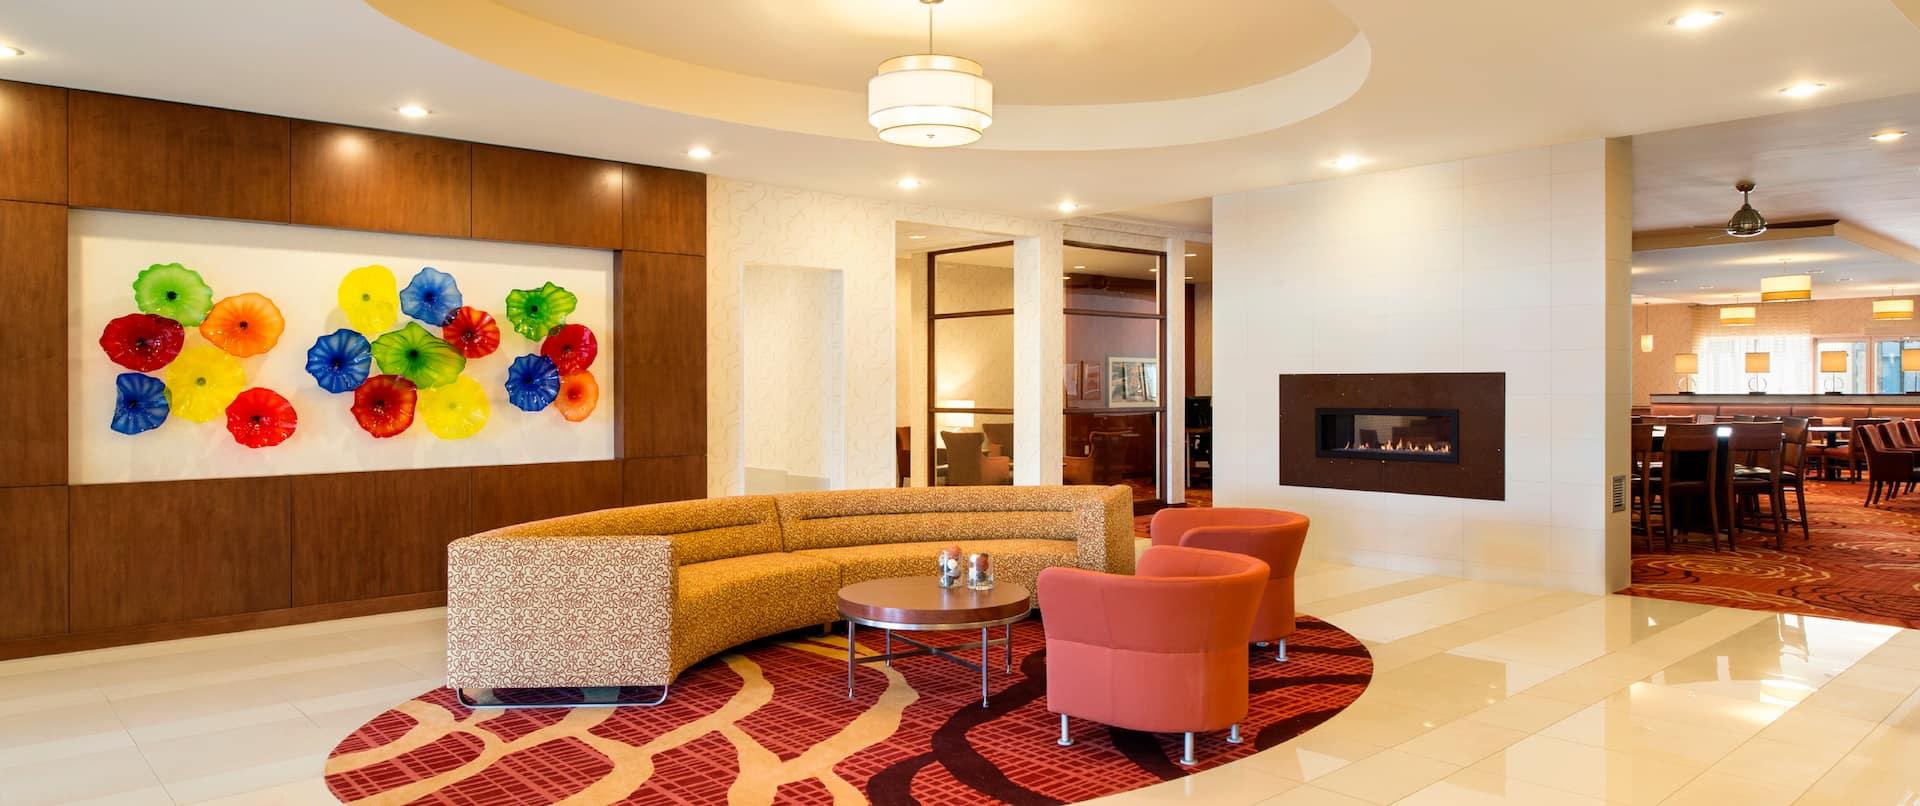 Soft Seating by Art Feature and Fireplace in Lobby Lounge Area With View of Dining Area